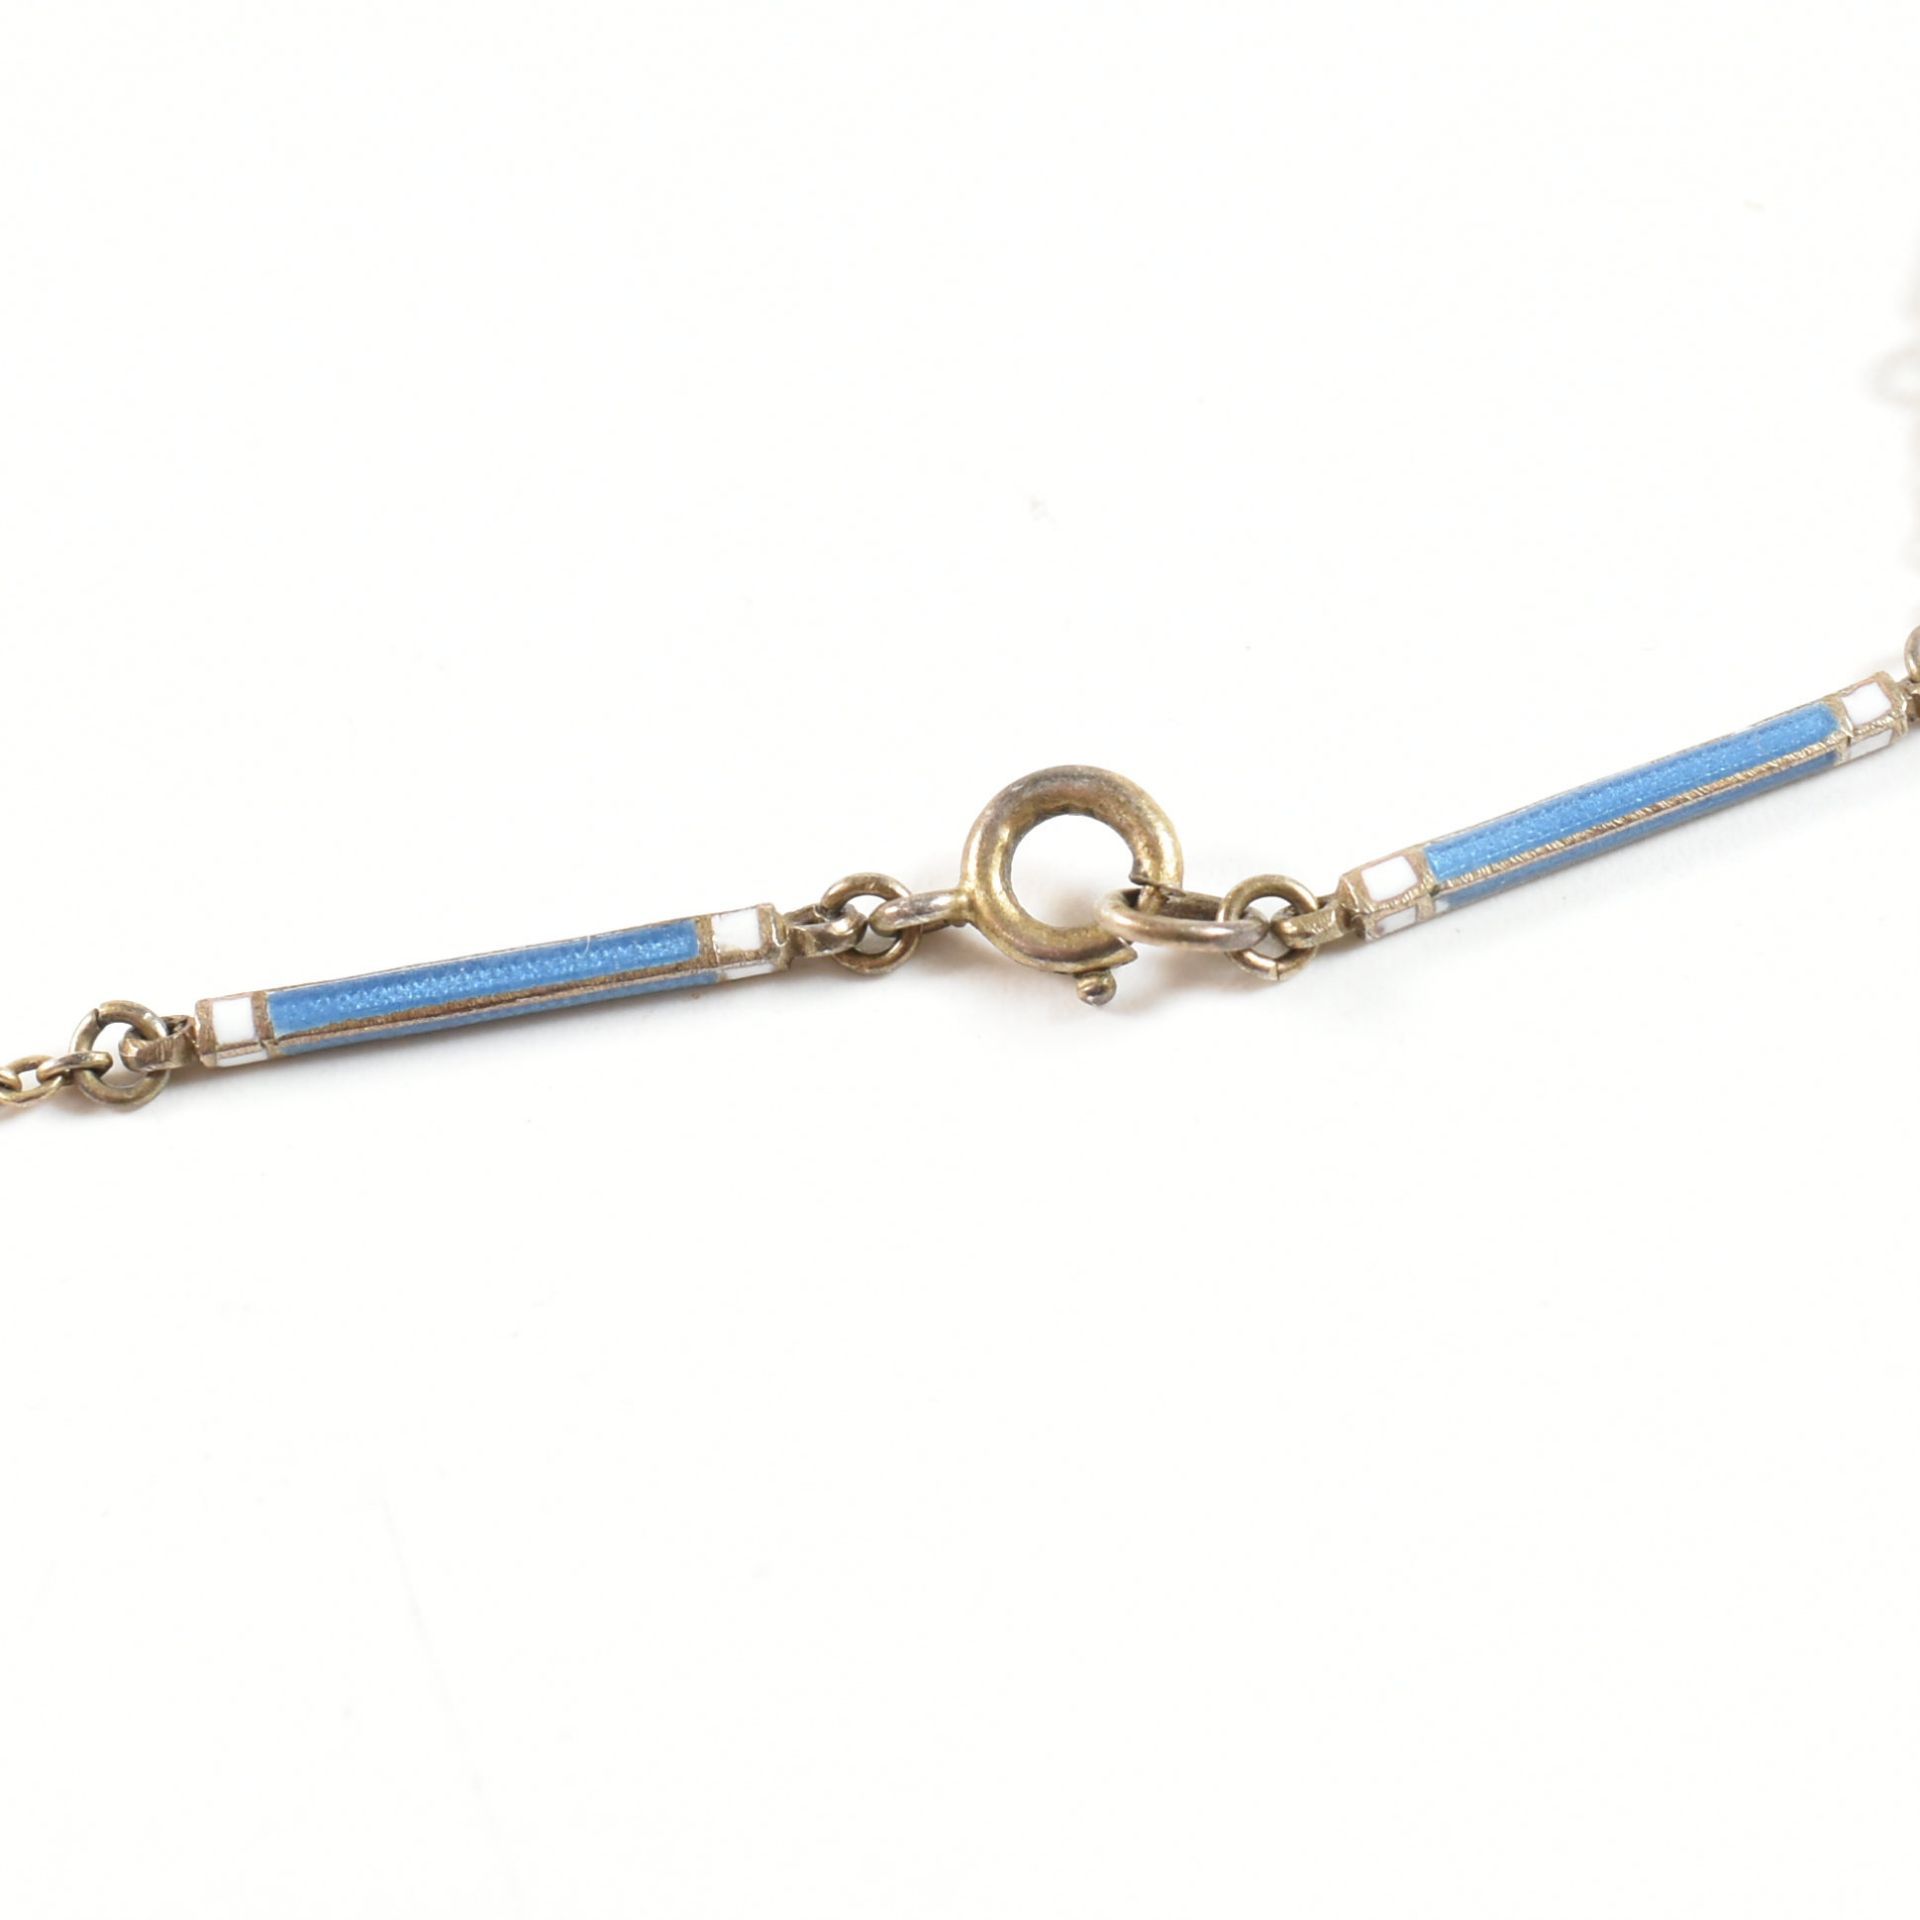 EARLY 20TH CENTURY SWISS SILVER ENAMEL BALL WATCH & CHAIN - Image 8 of 13